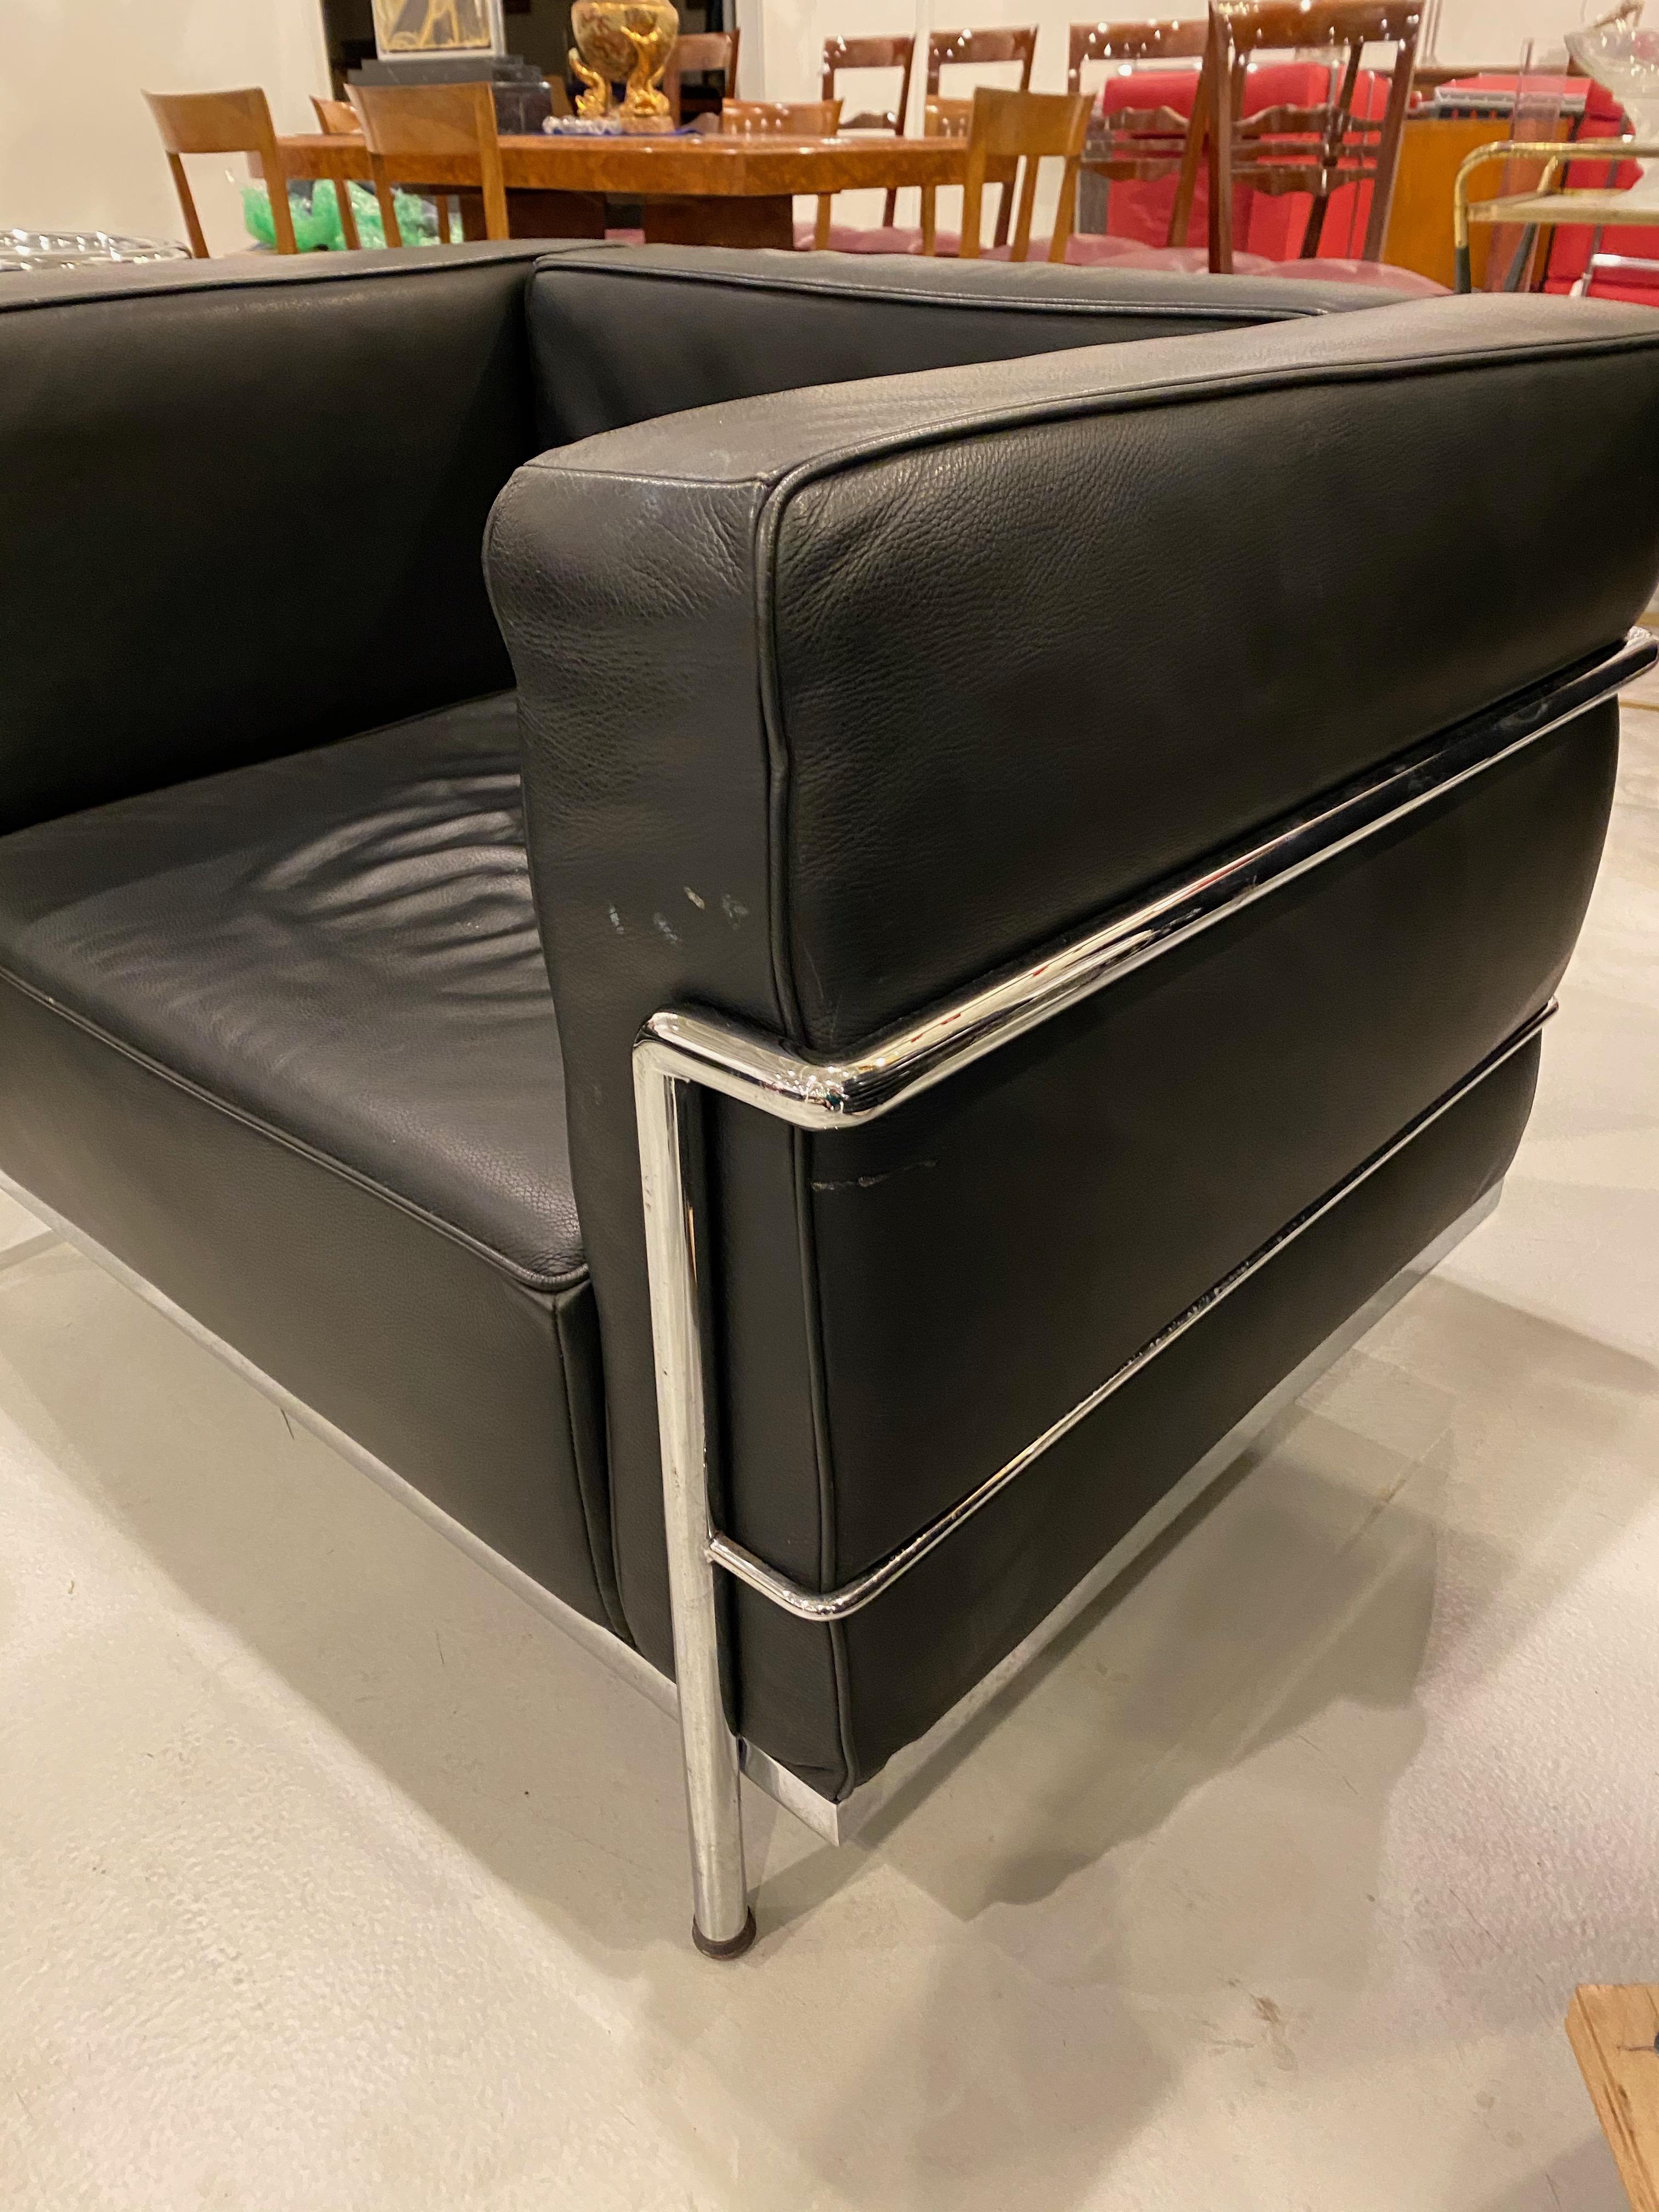 Beautiful and stylish chrome and black leather club chairs in the style of Le Corbusier.